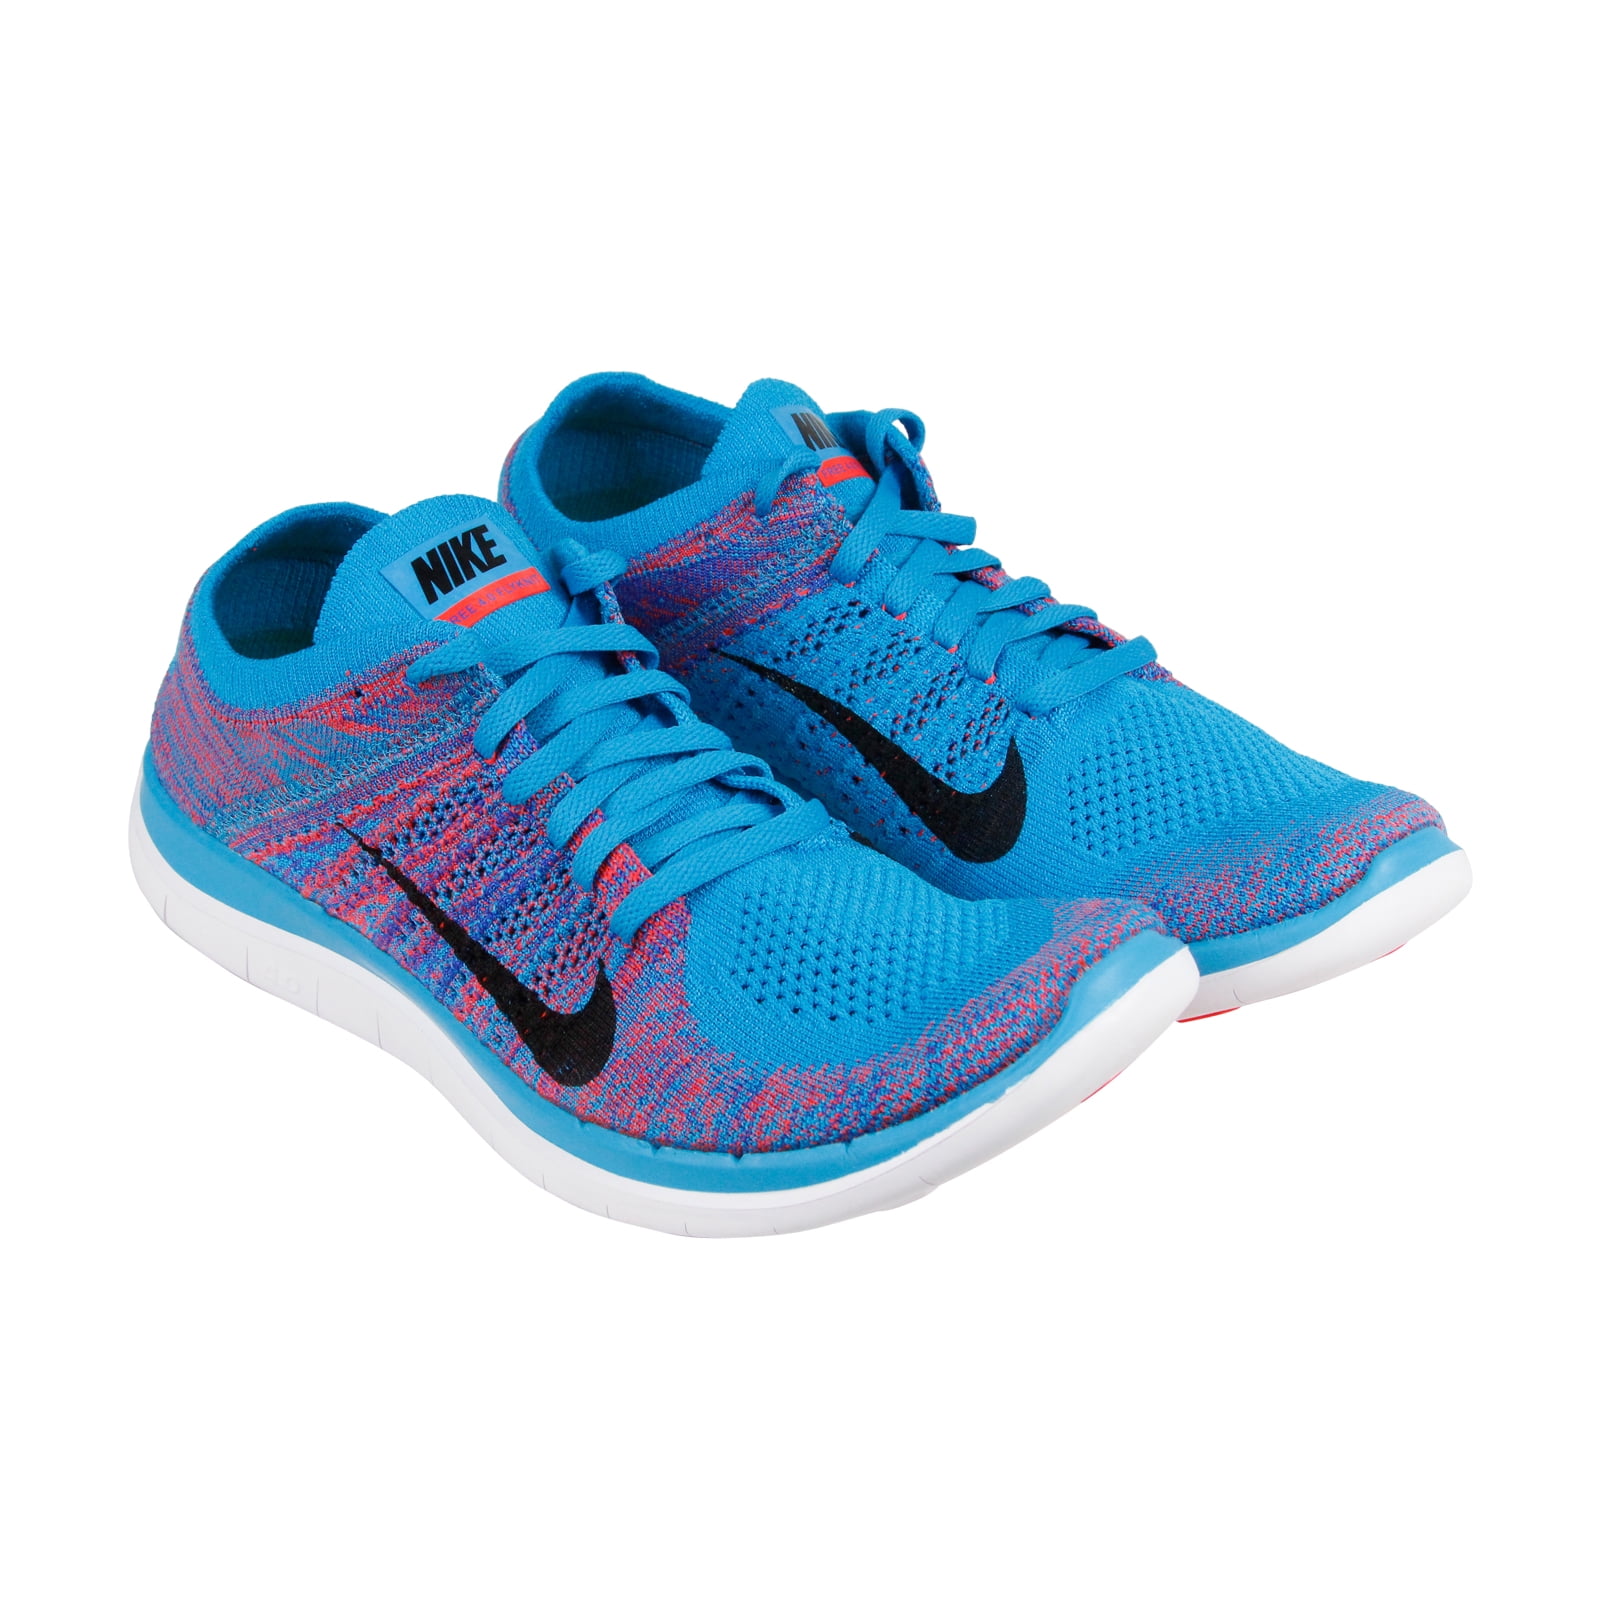 Nike Free 4.0 Flyknit Mens Blue Mesh Athletic Lace Running Shoes Walmart.com